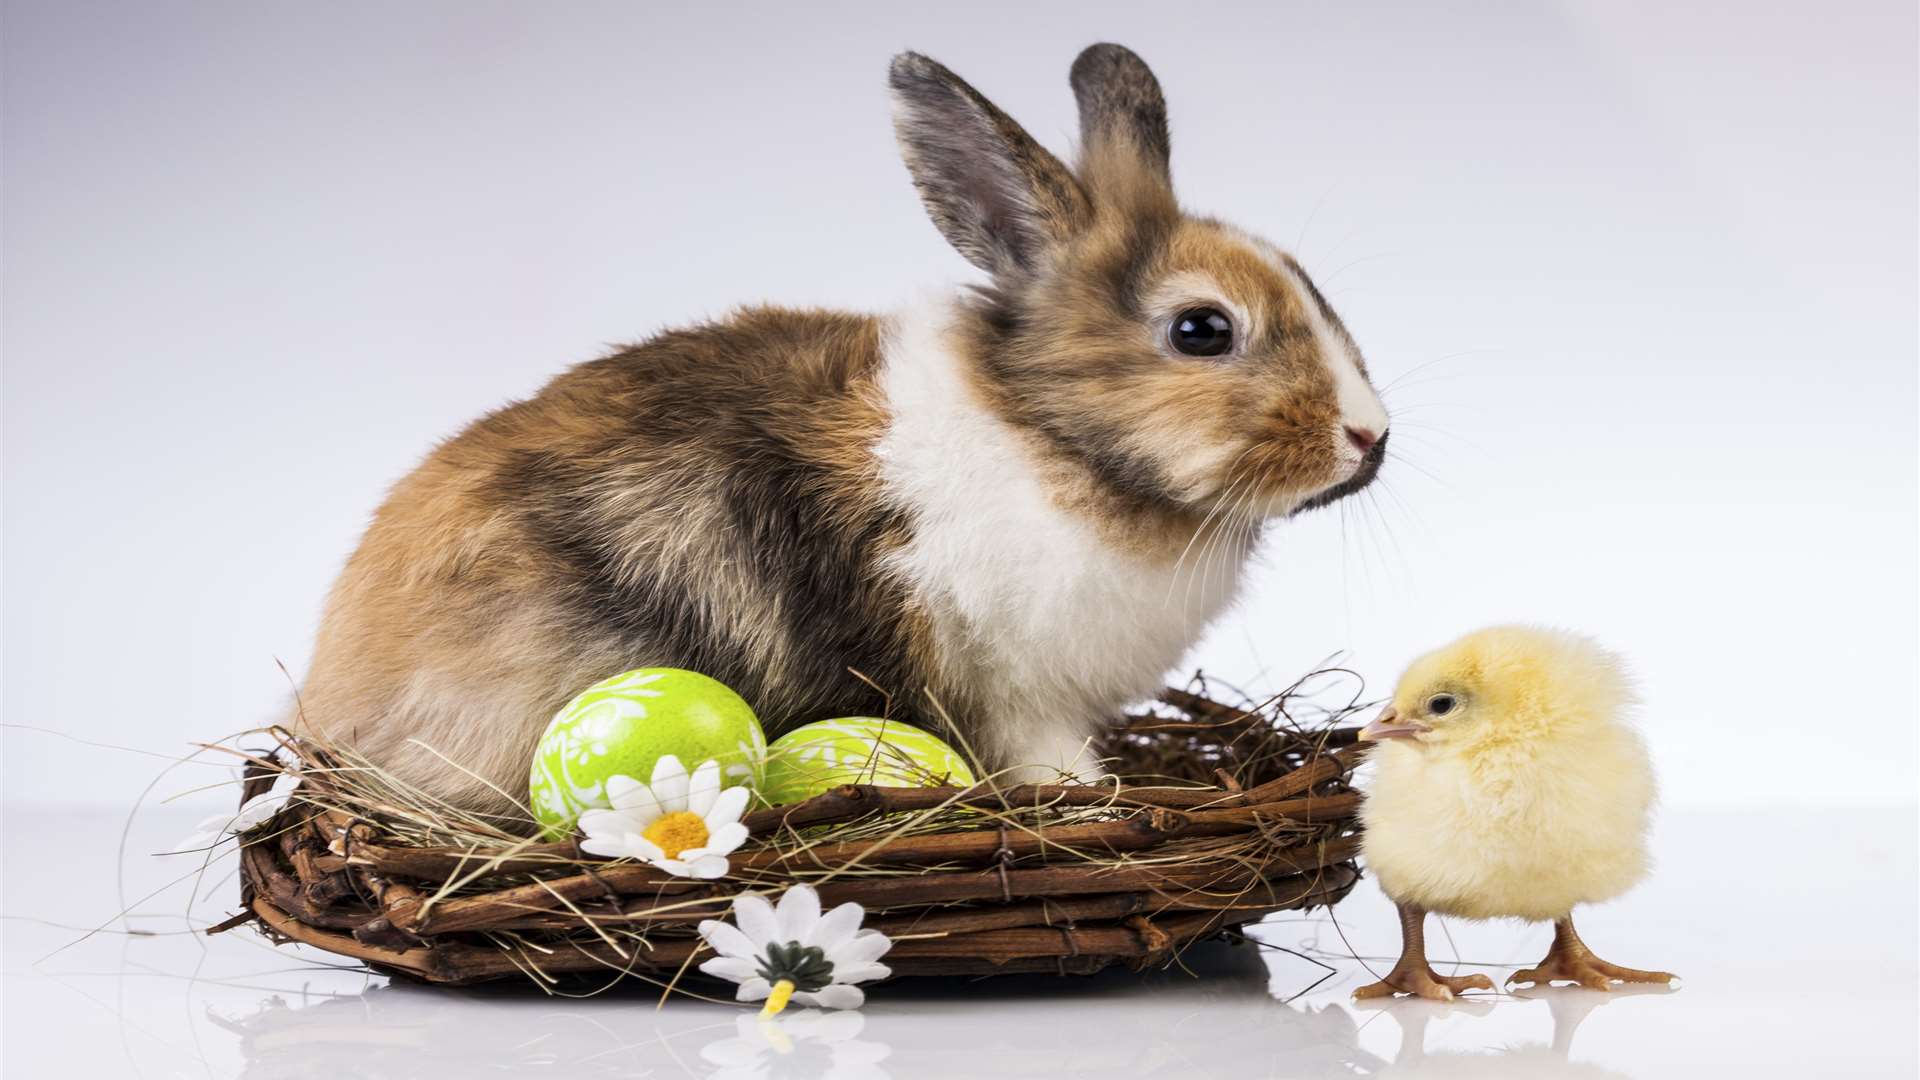 You could see a real bunny this Easter weekend